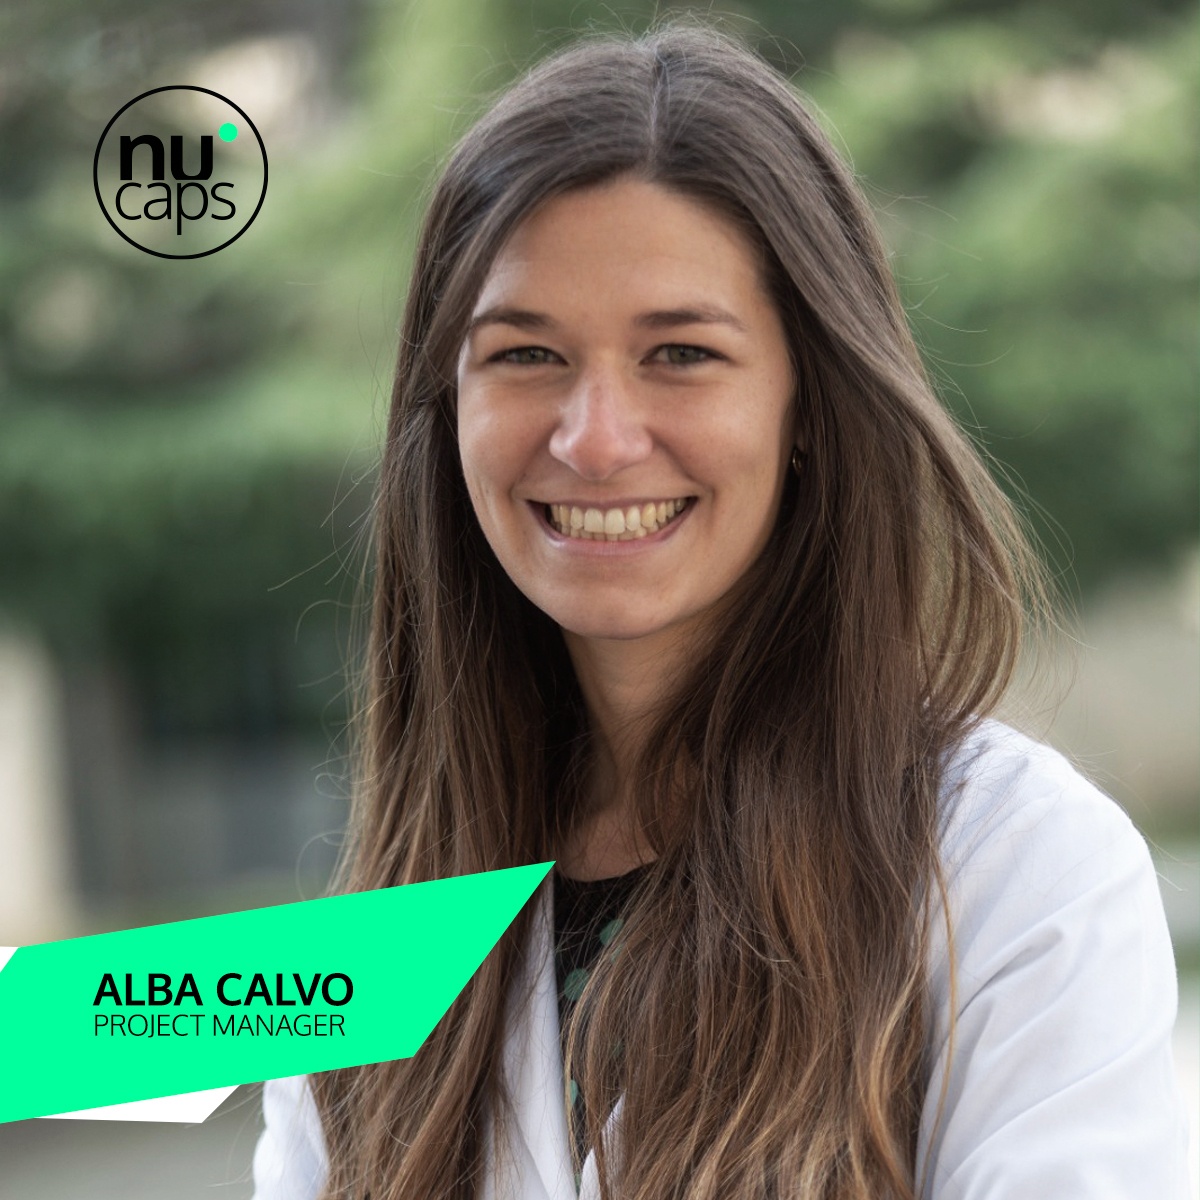 Image of Alba Calvo joins the NUCAPS team as Project Manager